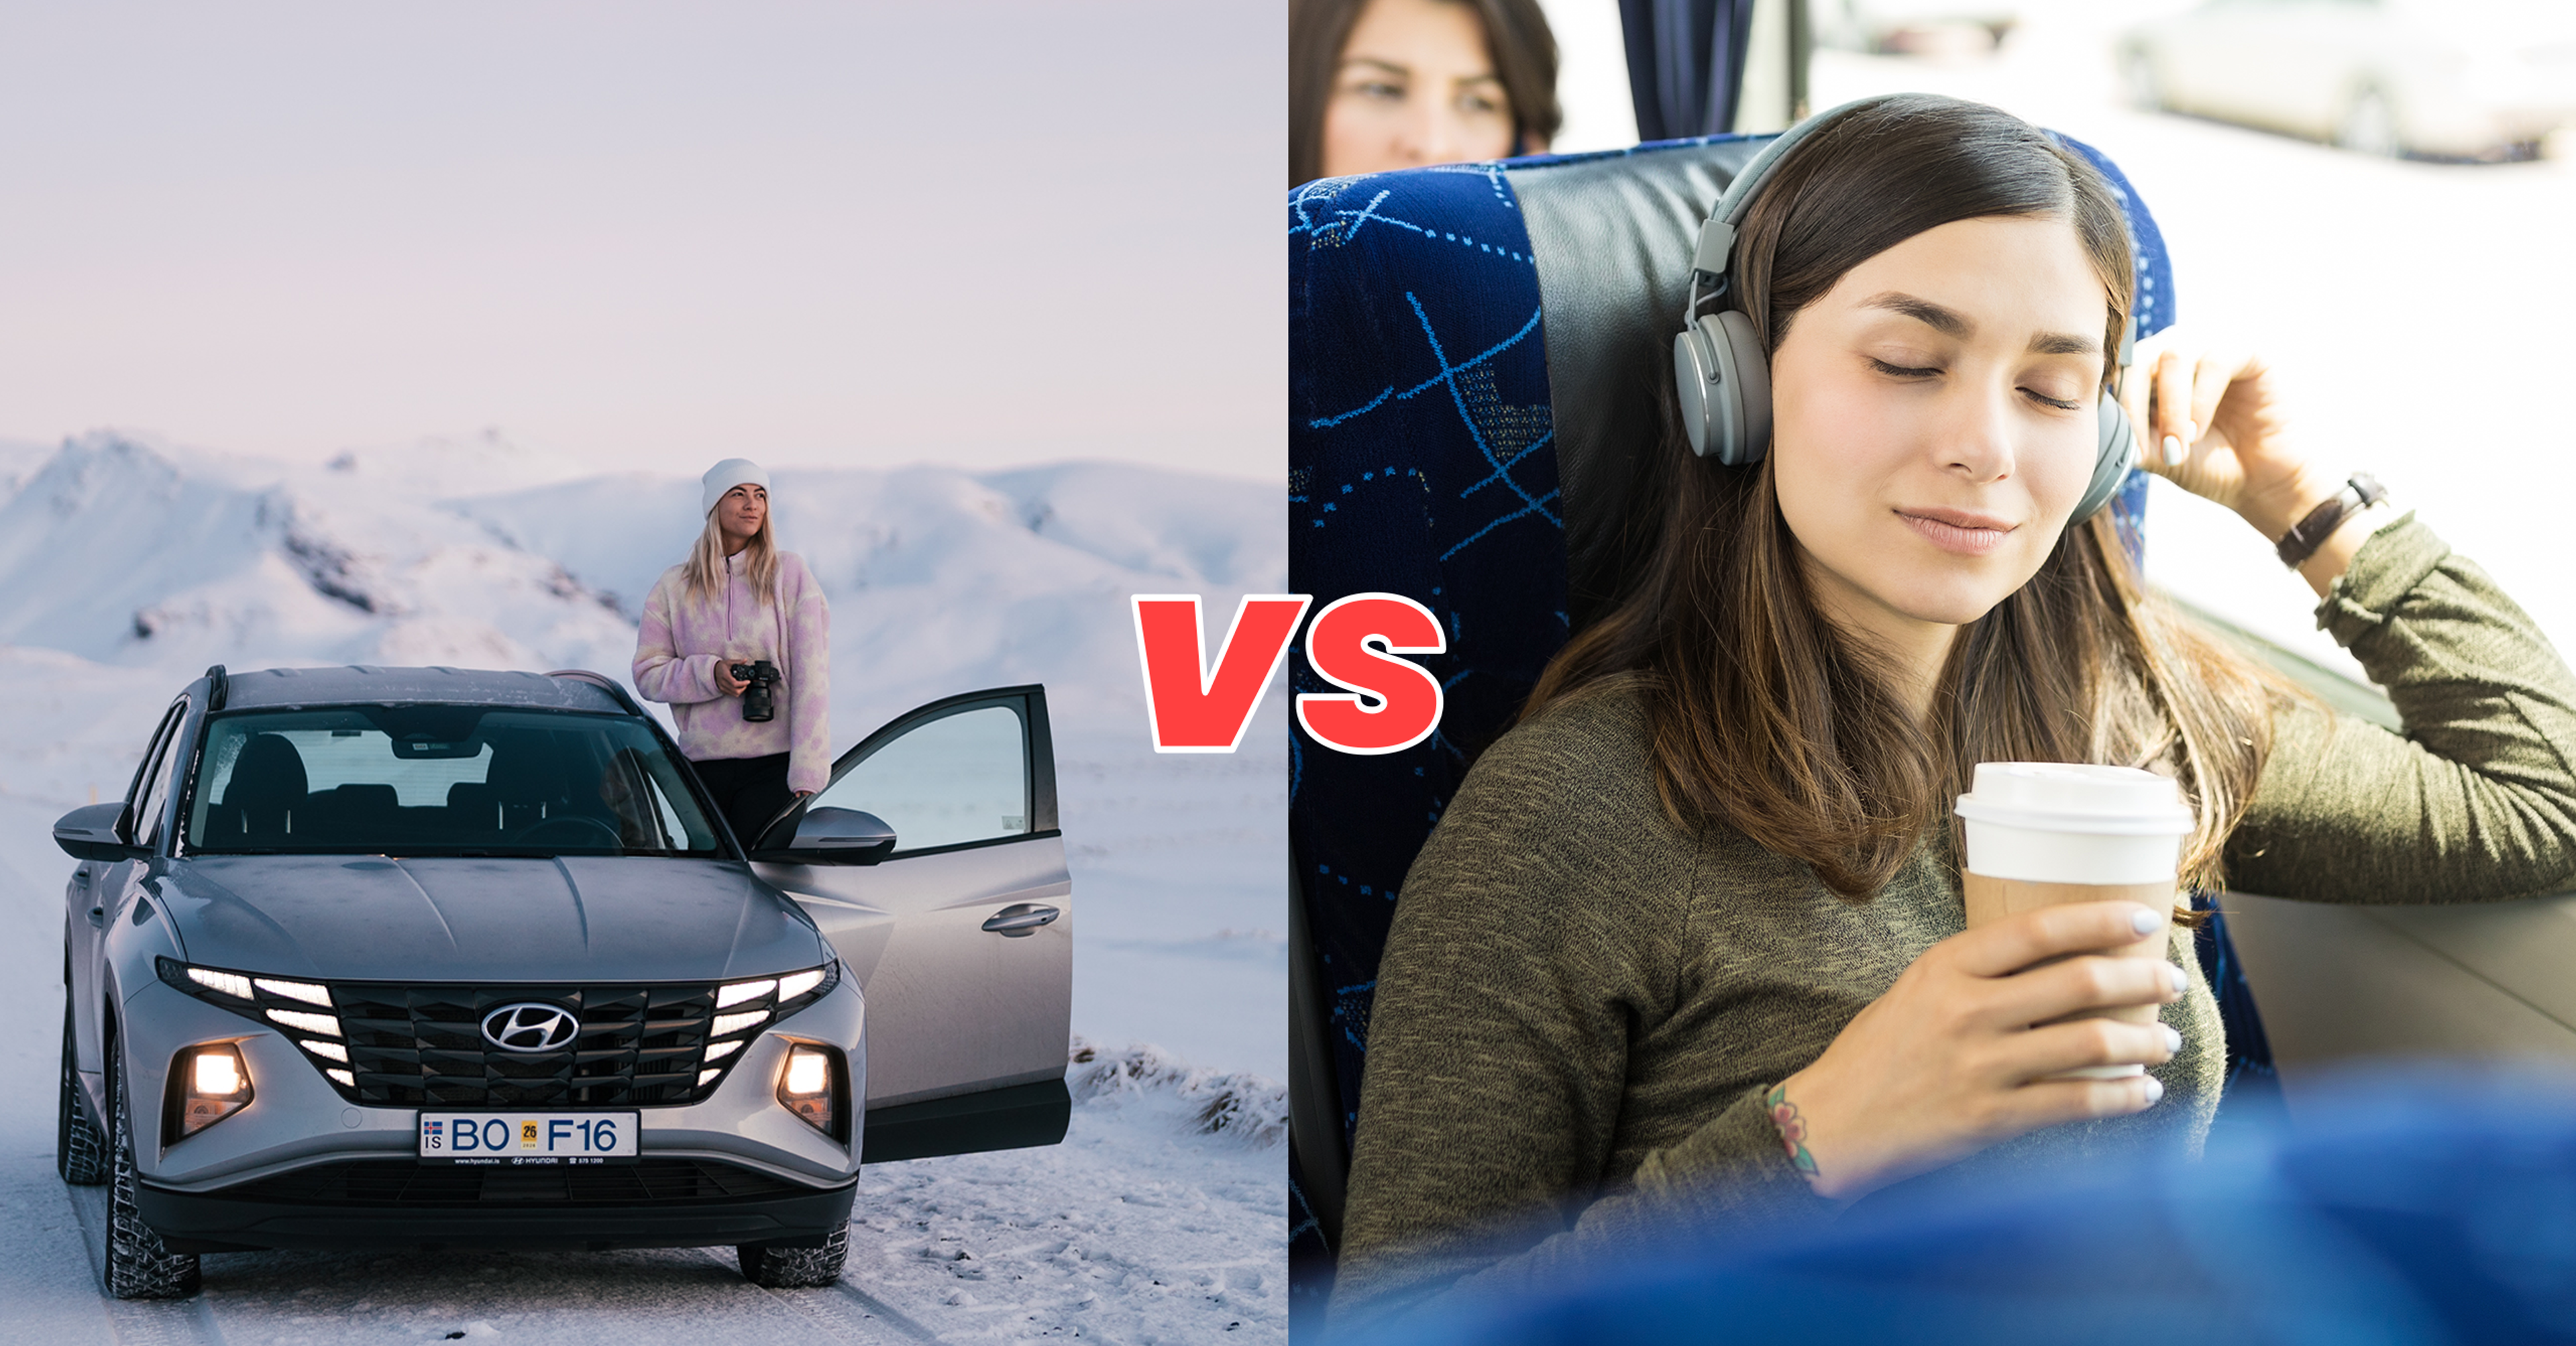 A woman enjoying icelandic nature in her rental car vs a woman in a Public Transportation drinking a coffee